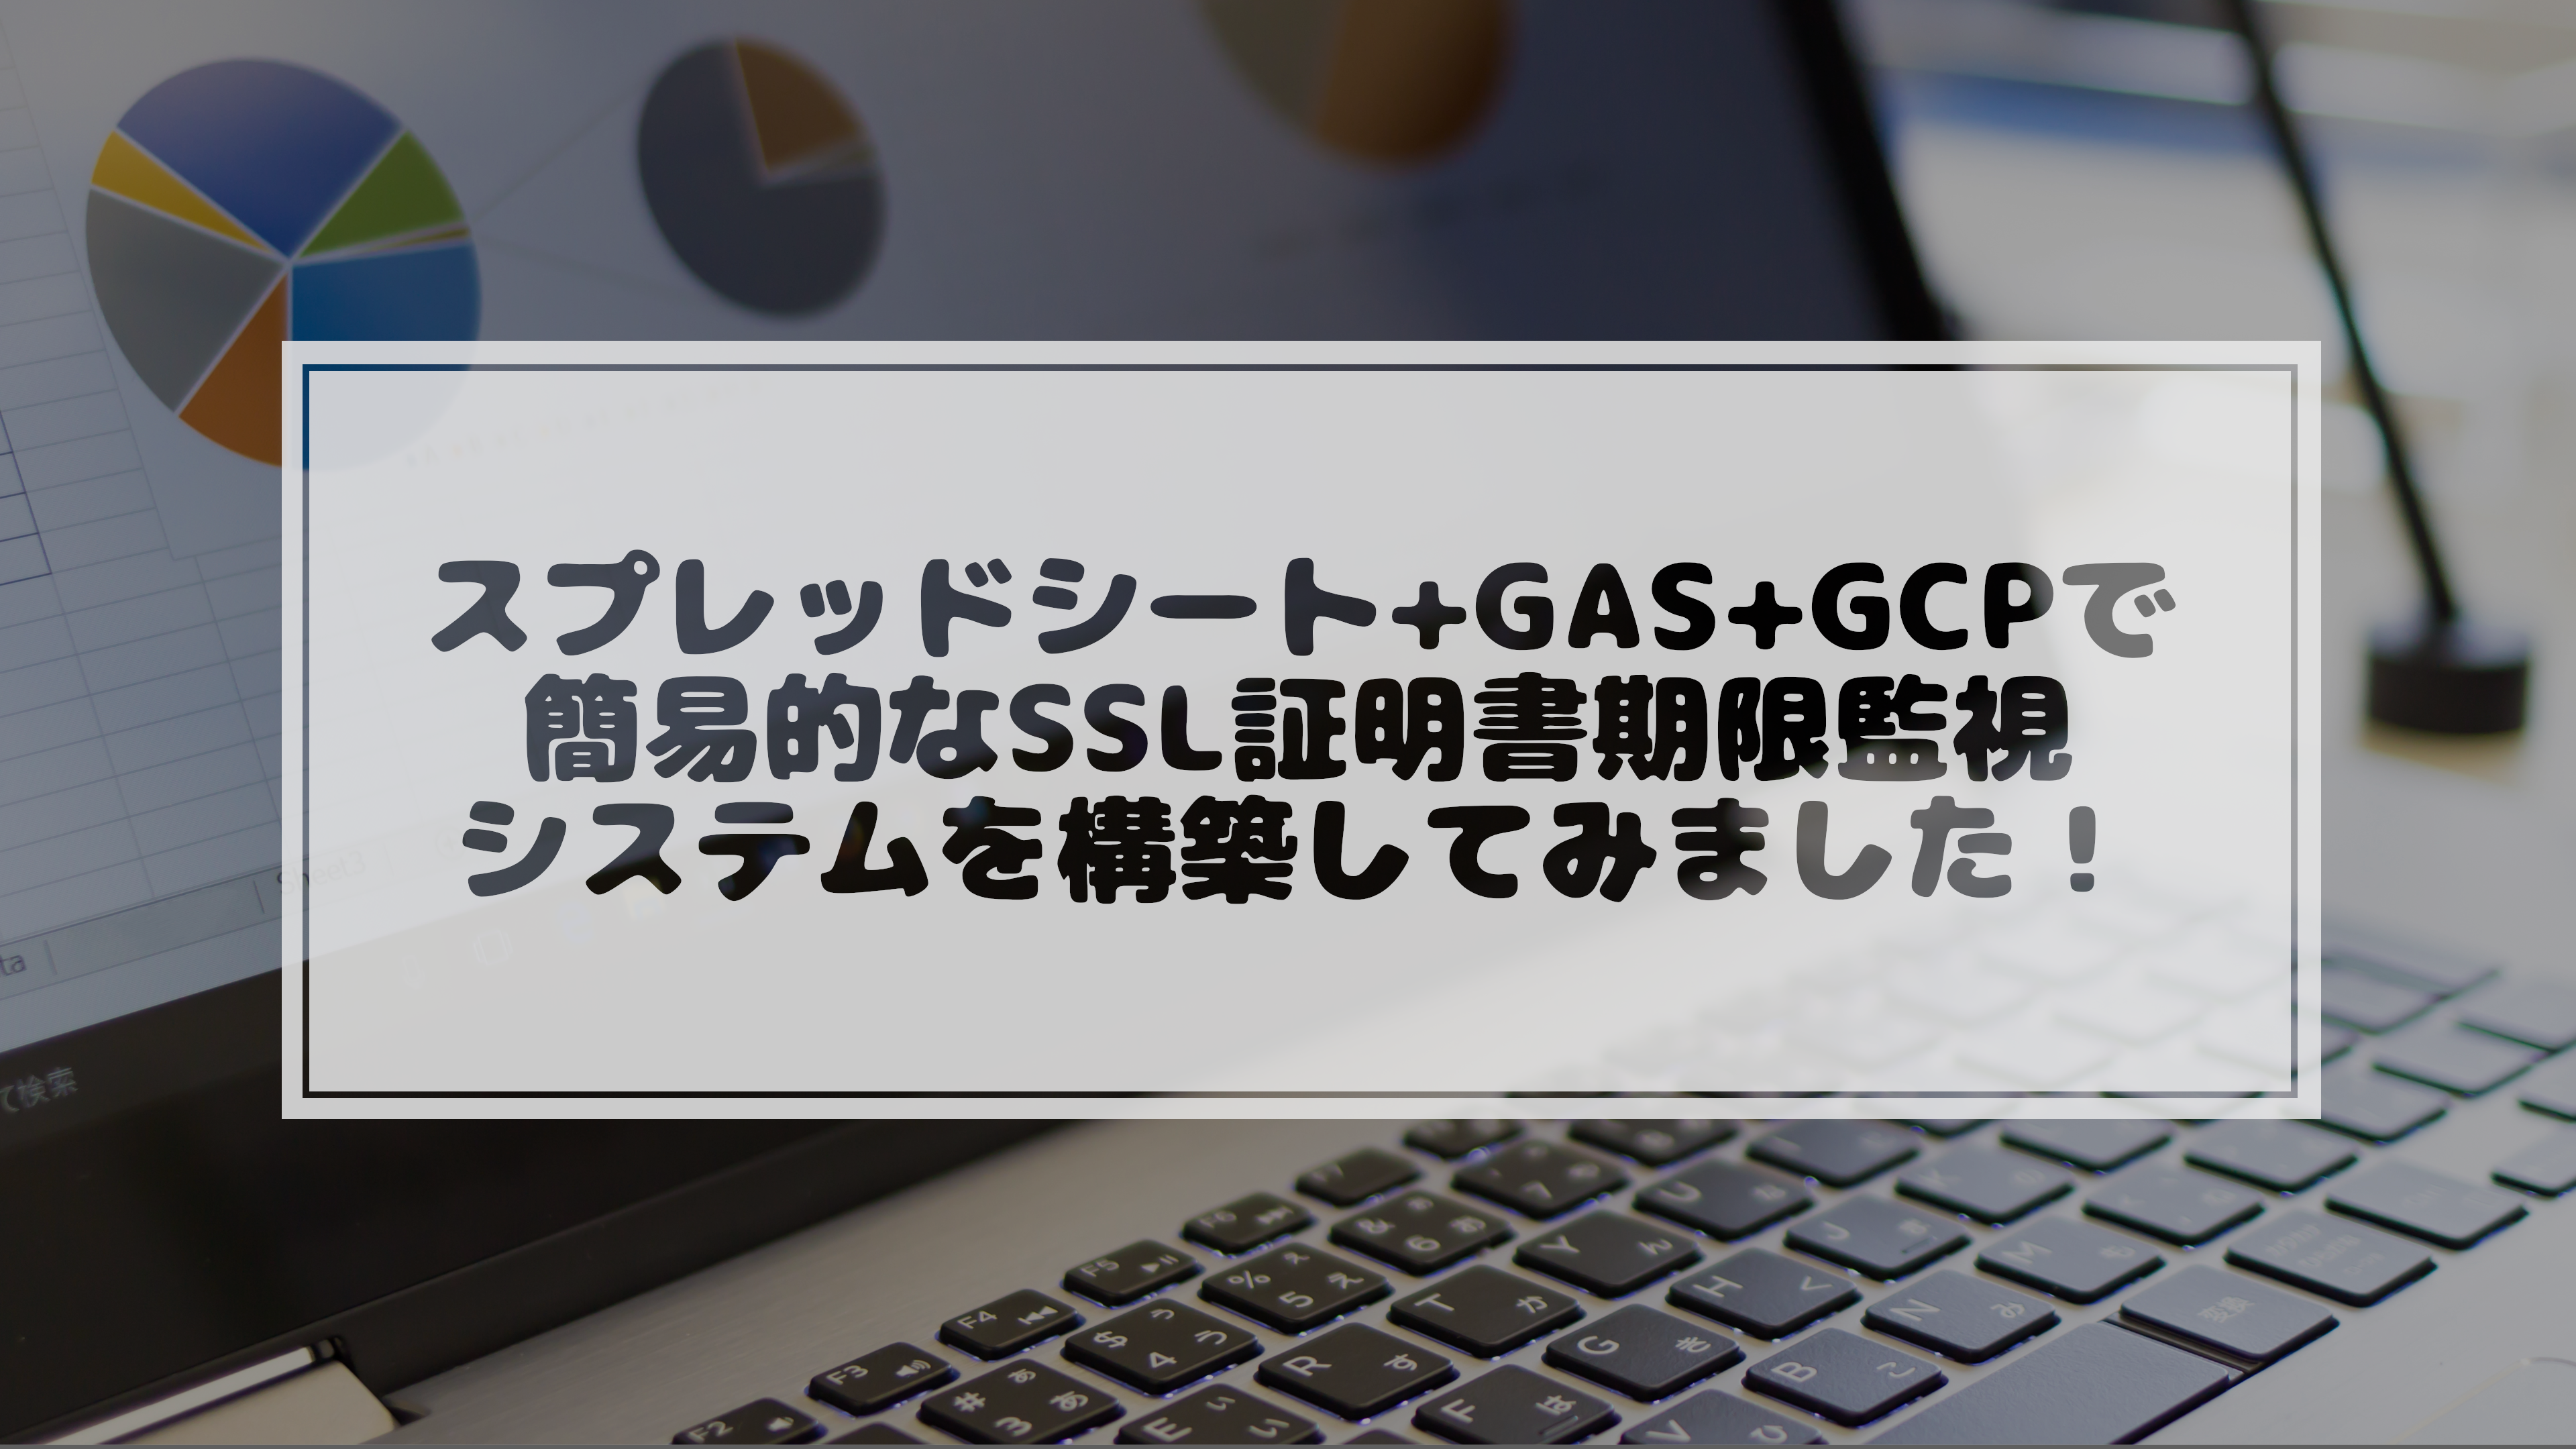 You are currently viewing スプレッドシート+GAS+GCPで簡易的なSSL証明書期限監視システムを構築してみました